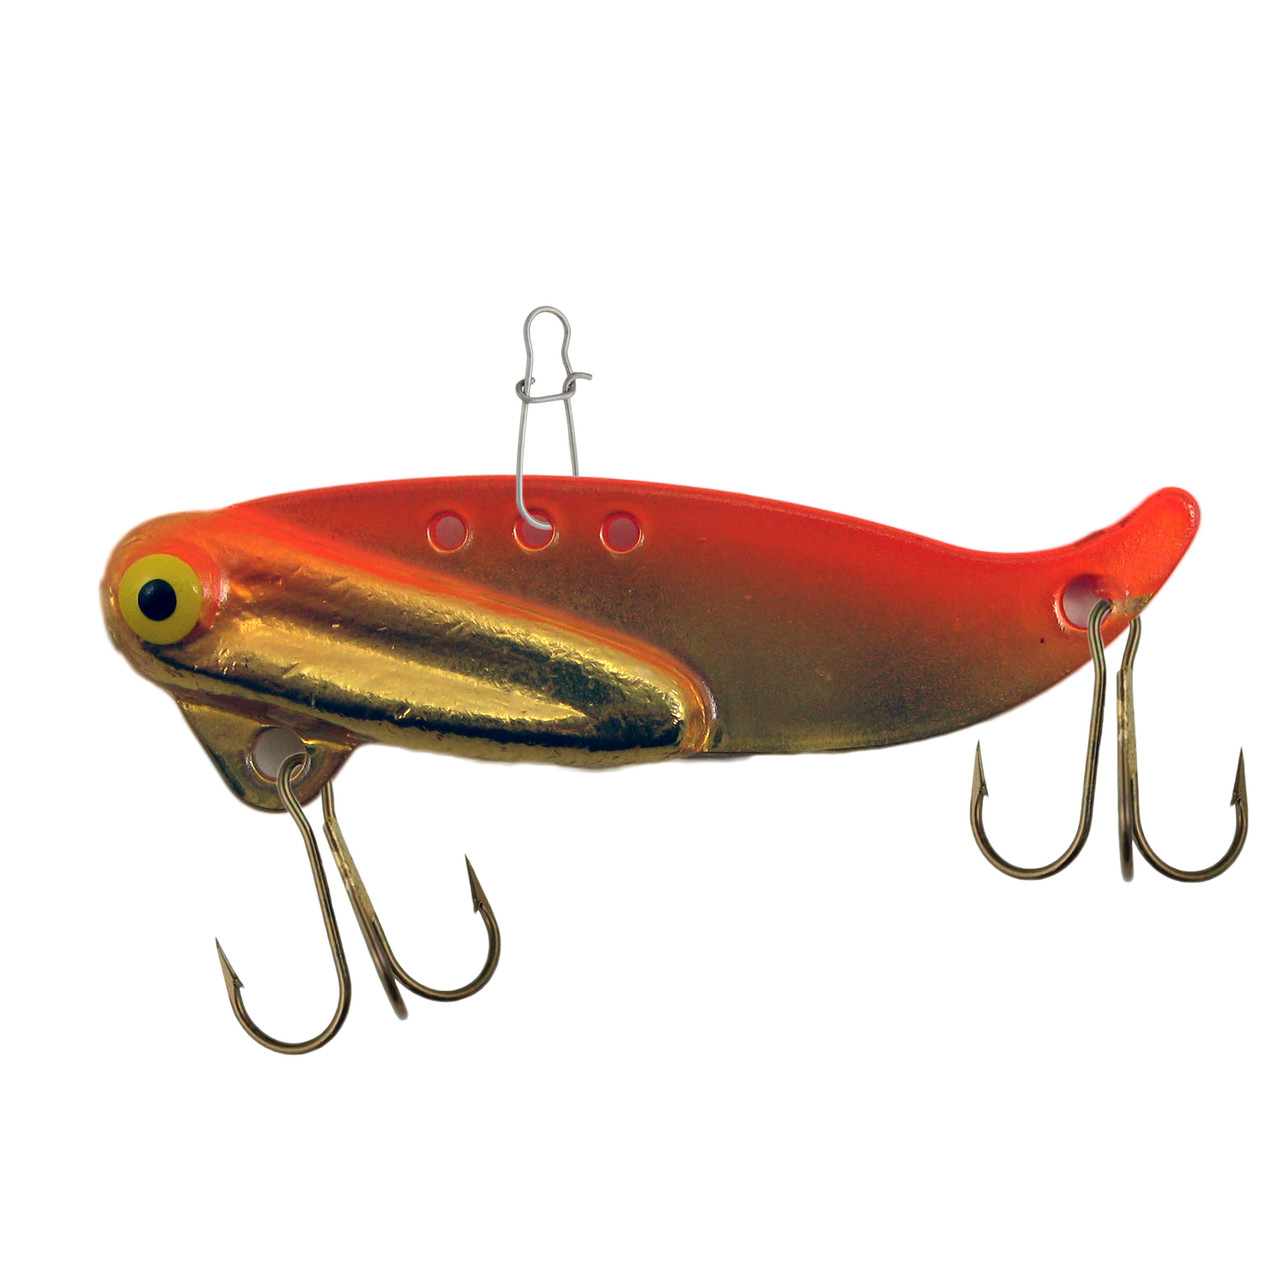 VIBE E BLADE BAIT 3/8oz RB204 in GOLD TIGER Blade Lure Bass